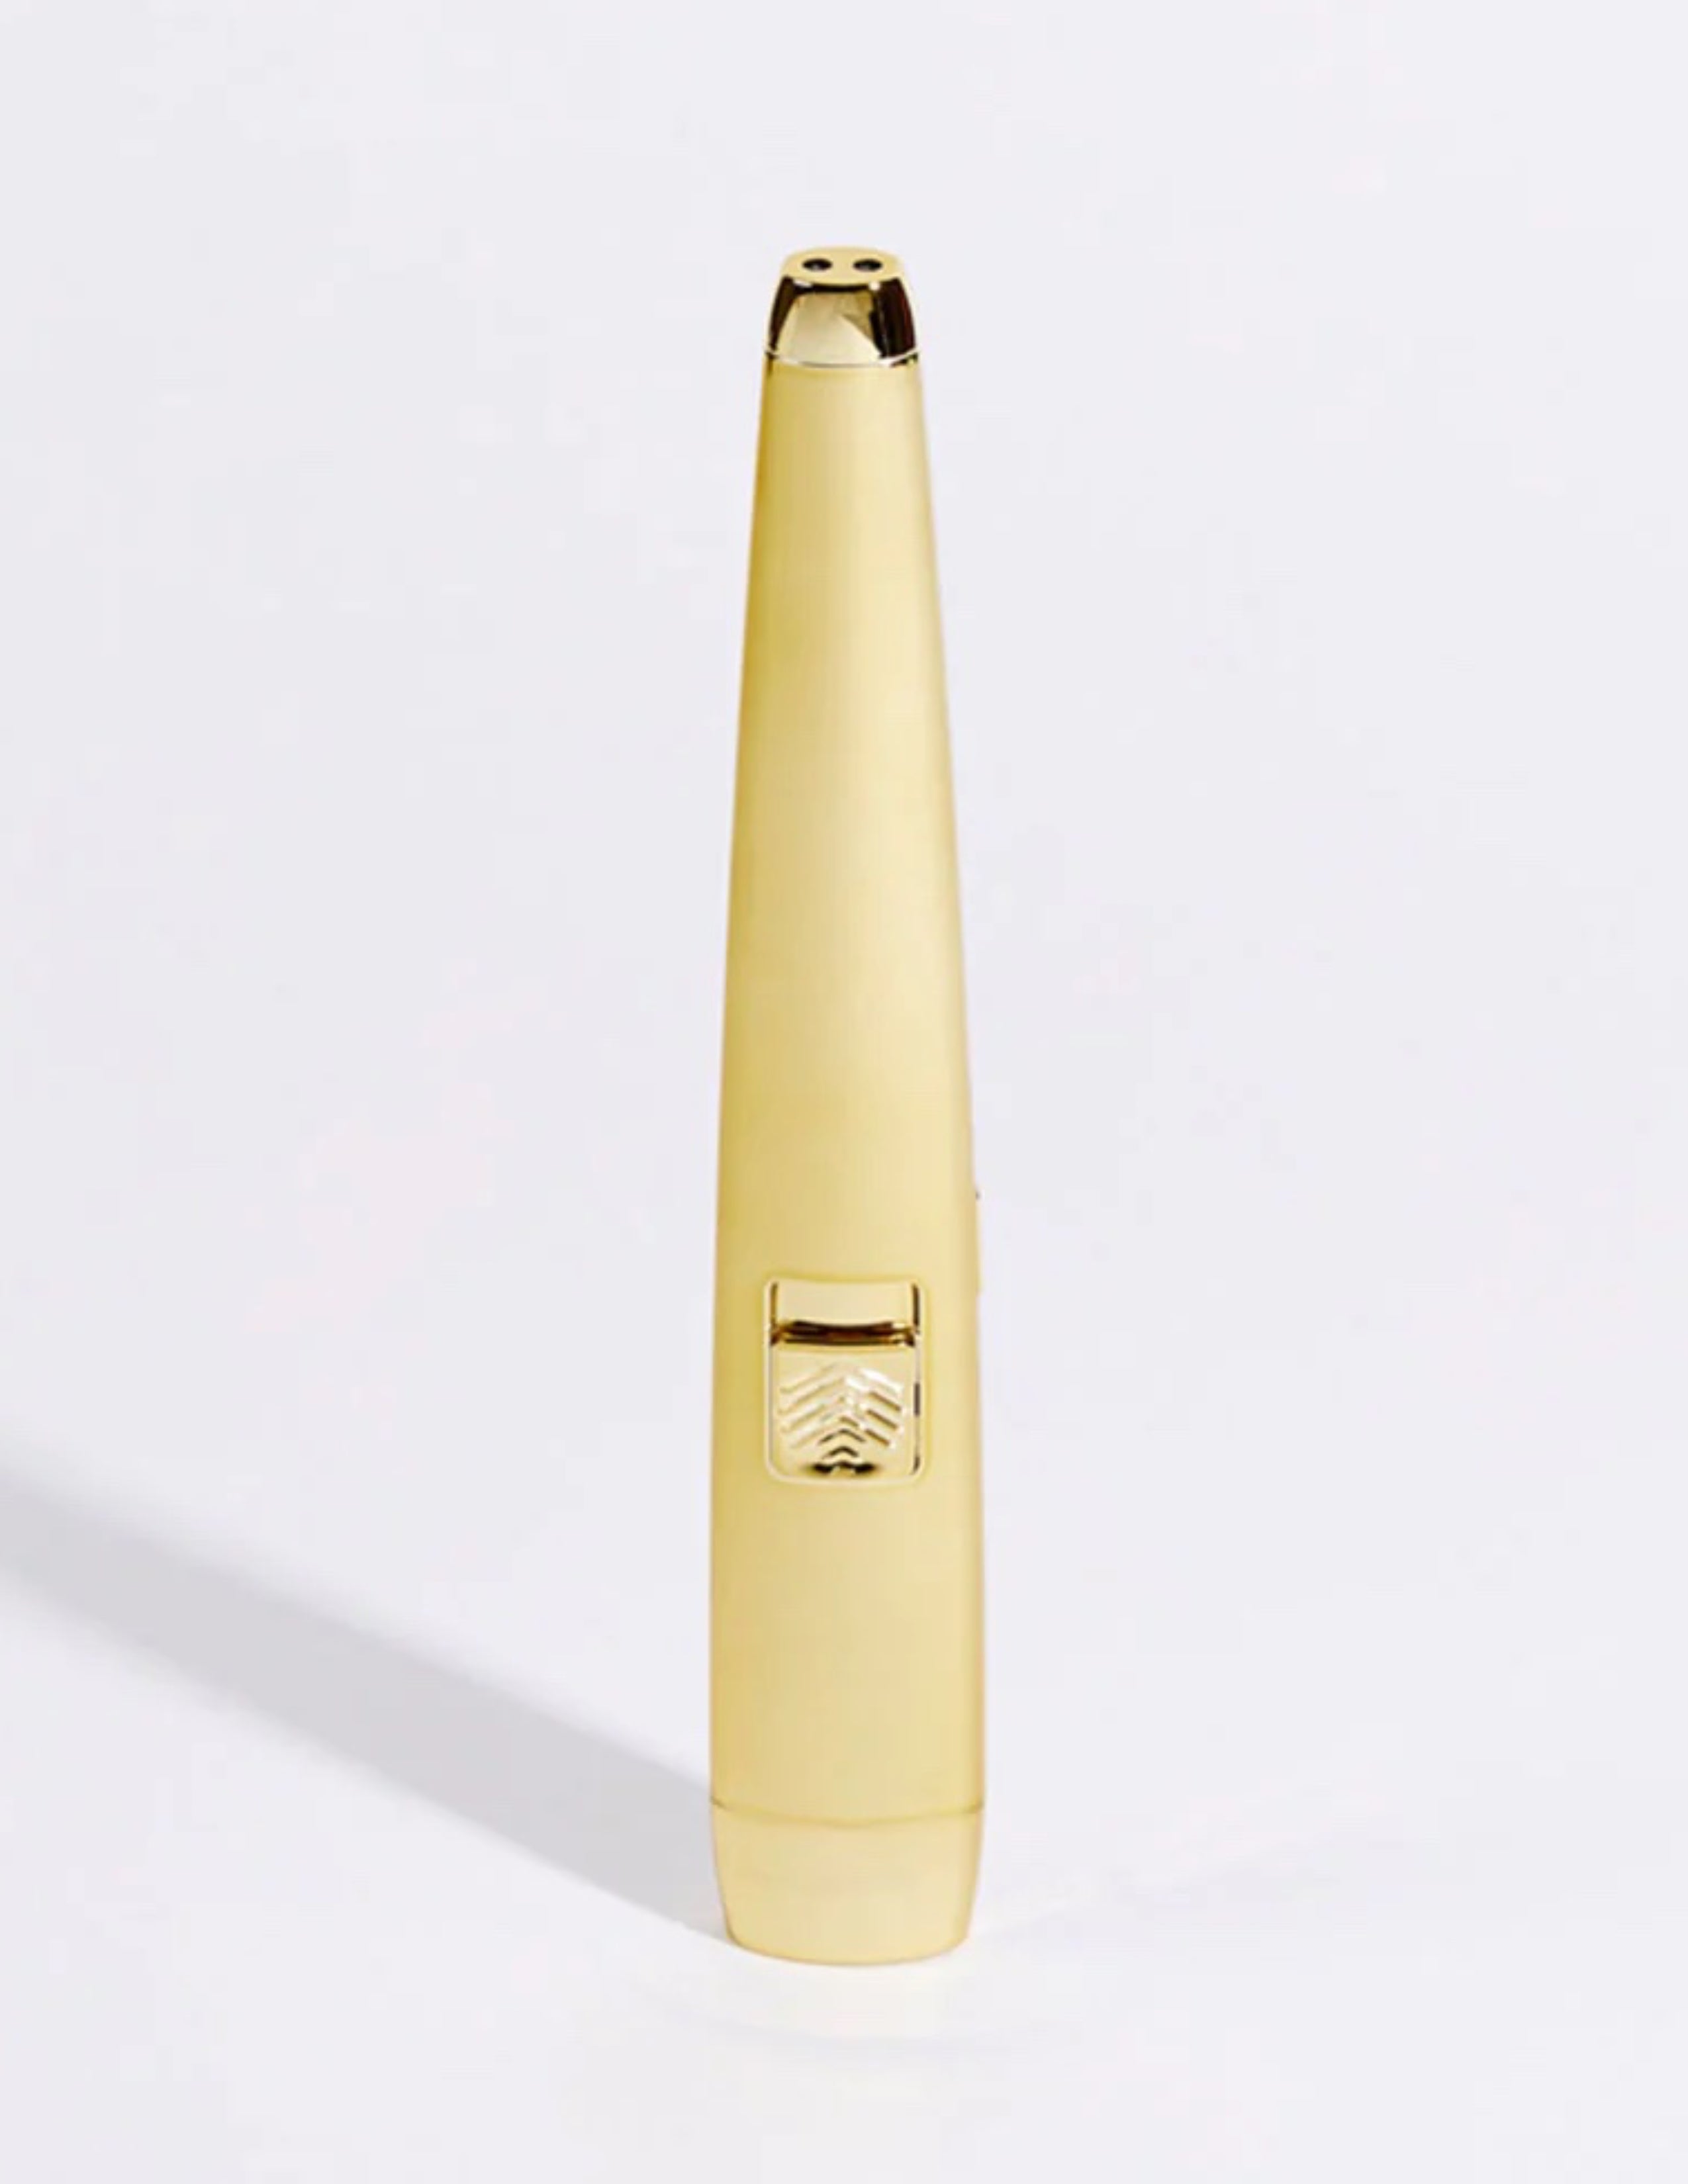 USB Rechargeable Molti Candle Lighter - Gold